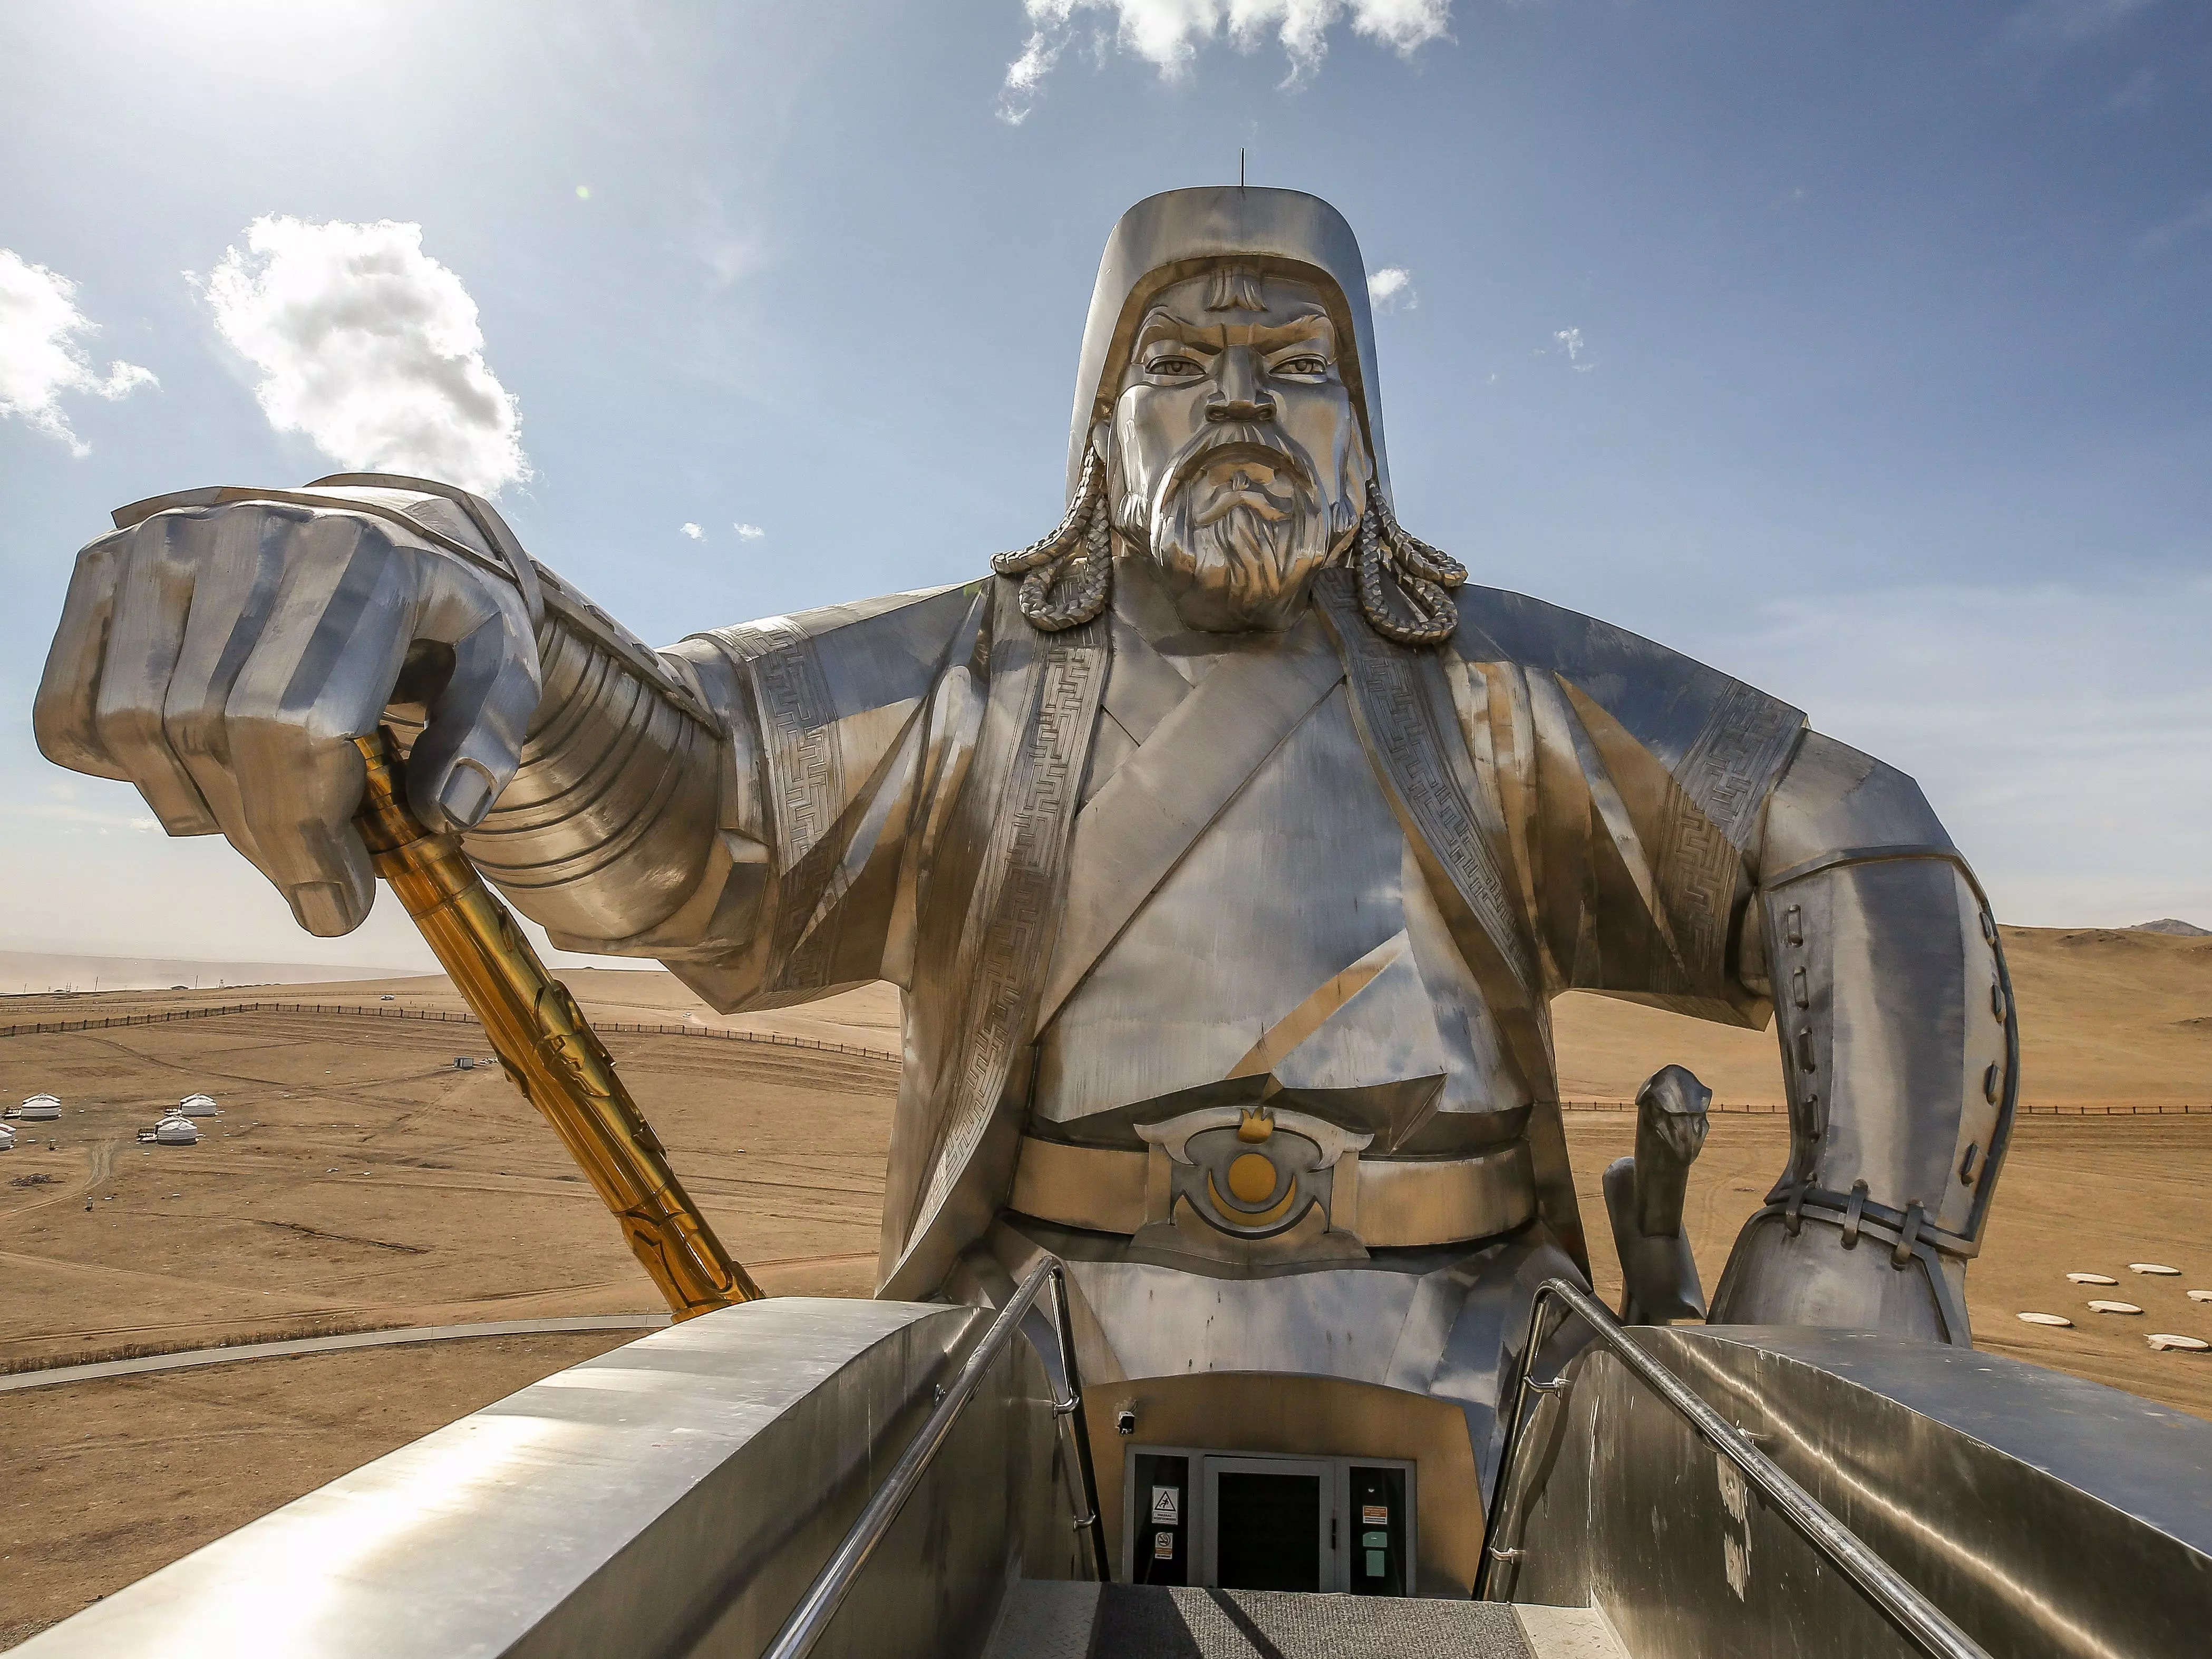 Archaeologists say swastika-decorated ruins could be a clue to the palace of Genghis Khan's bloodthirsty grandson